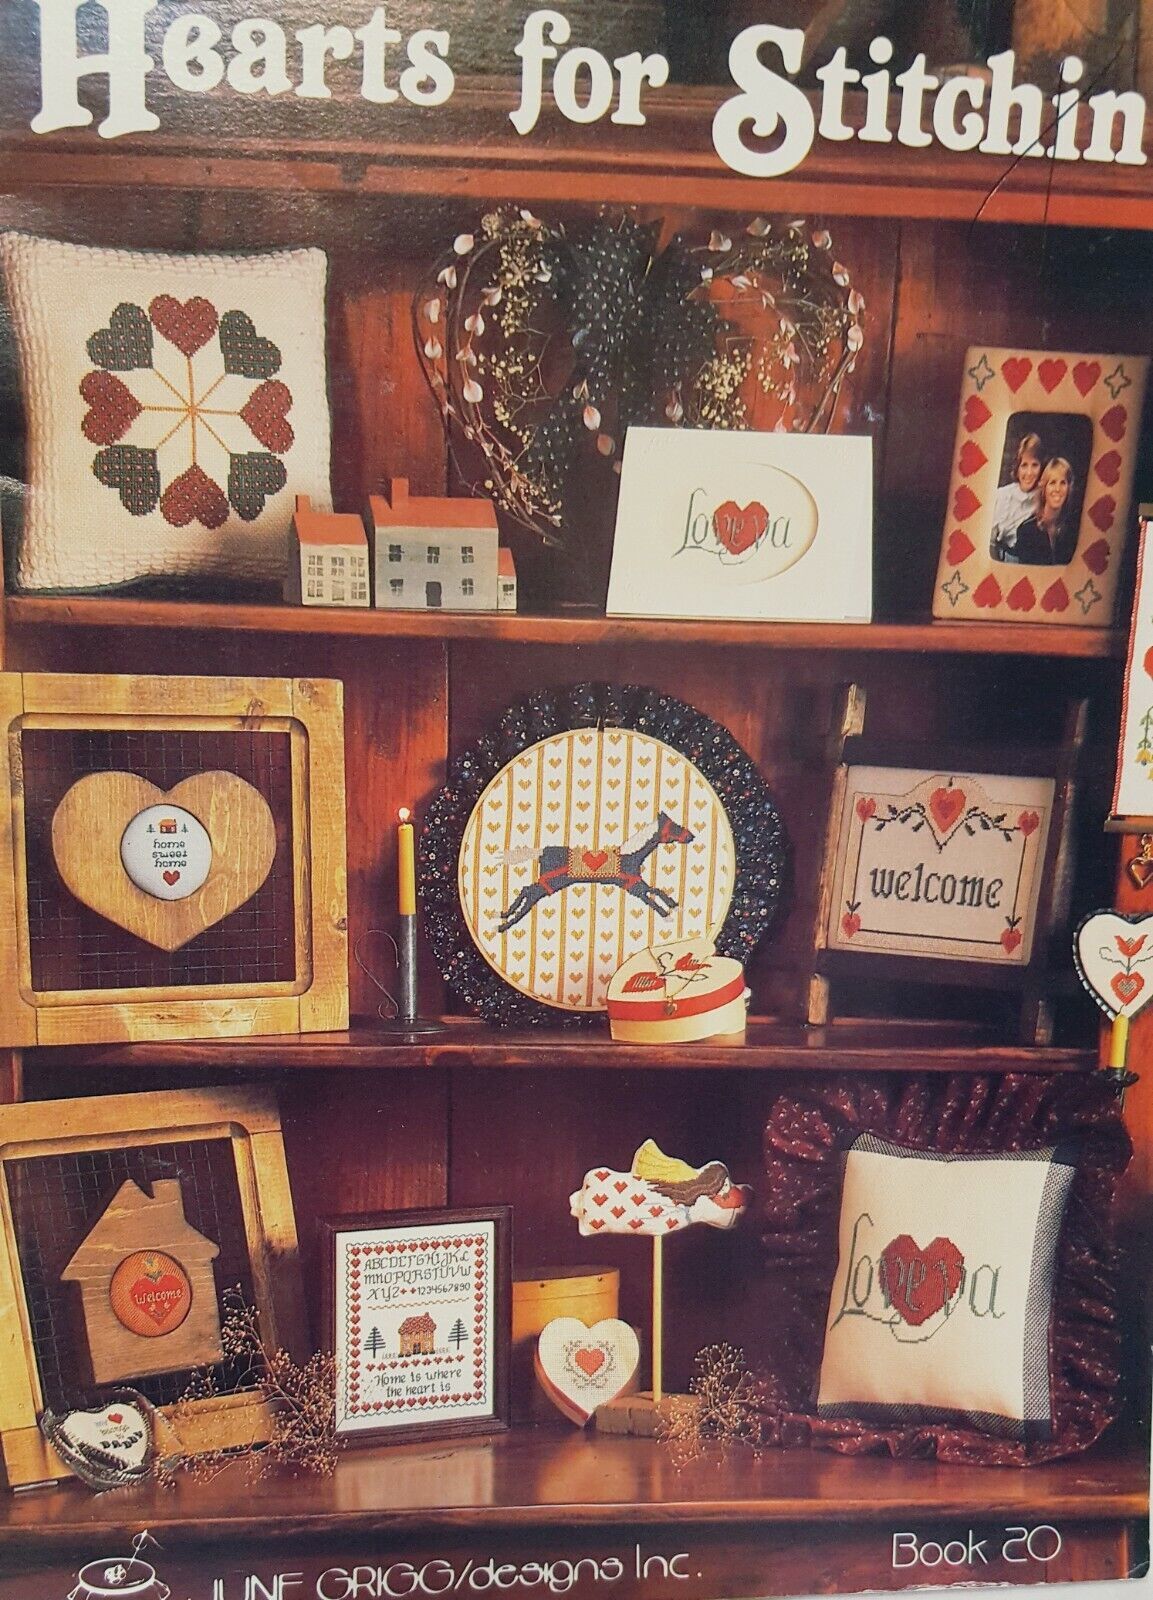 Primary image for Hearts for Stitchin Counted Cross Stitch Pattern Leaflet 20 June Grigg 1983